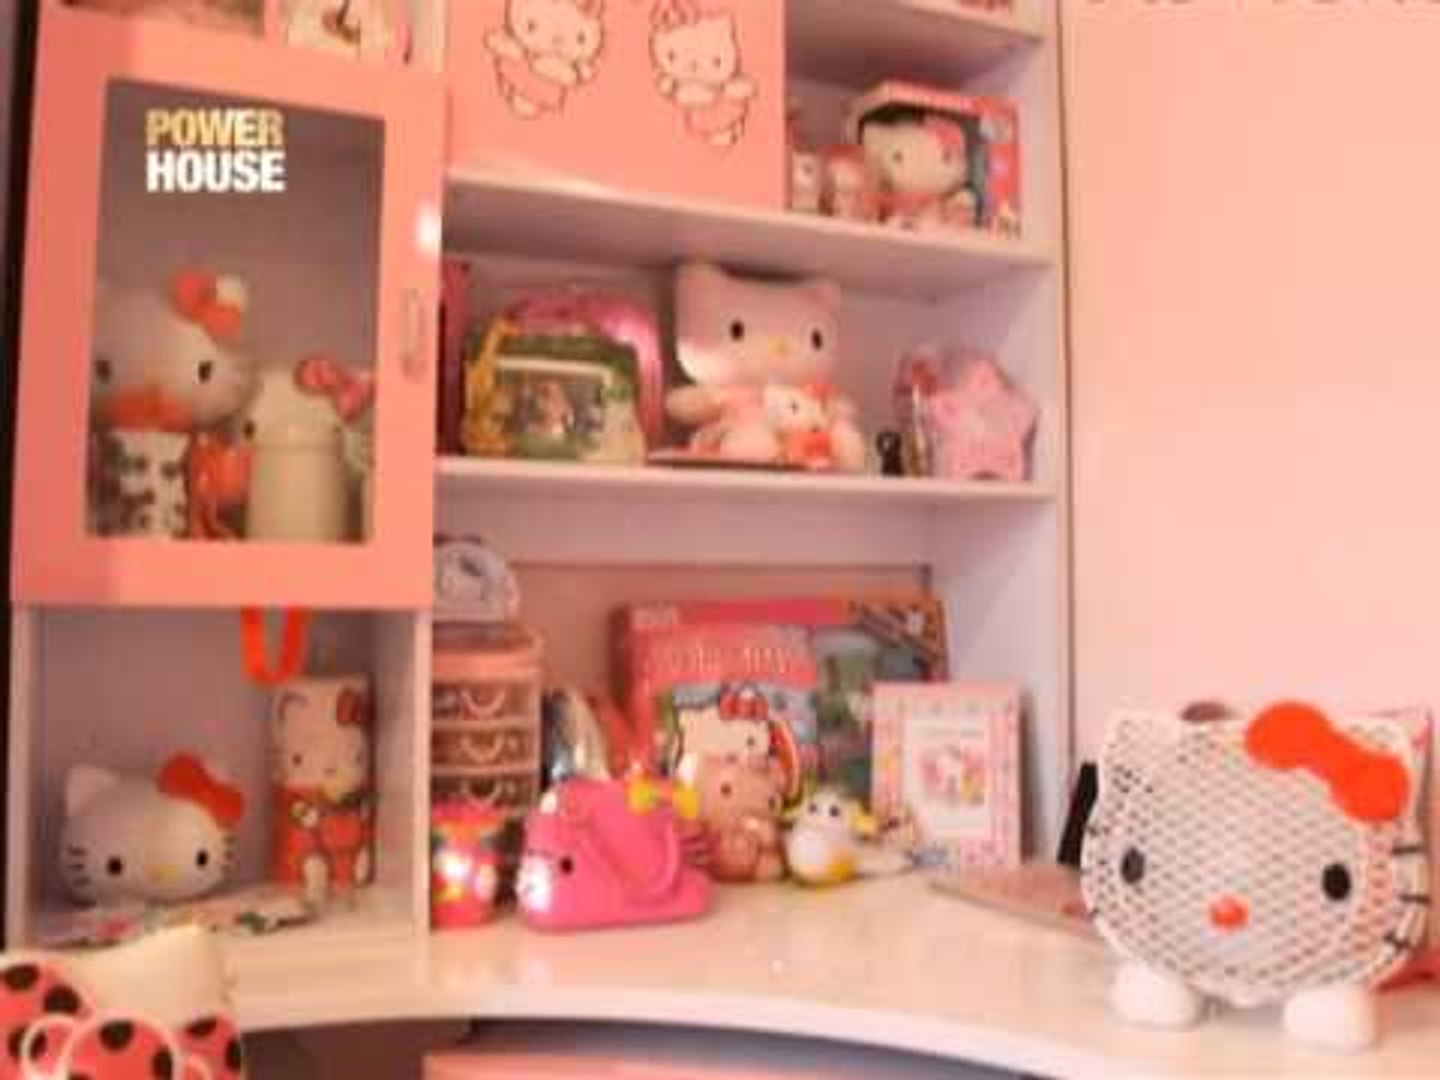 DJ Nicole Hyala's Hello Kitty Collection In Her Louis Vuitton Bag